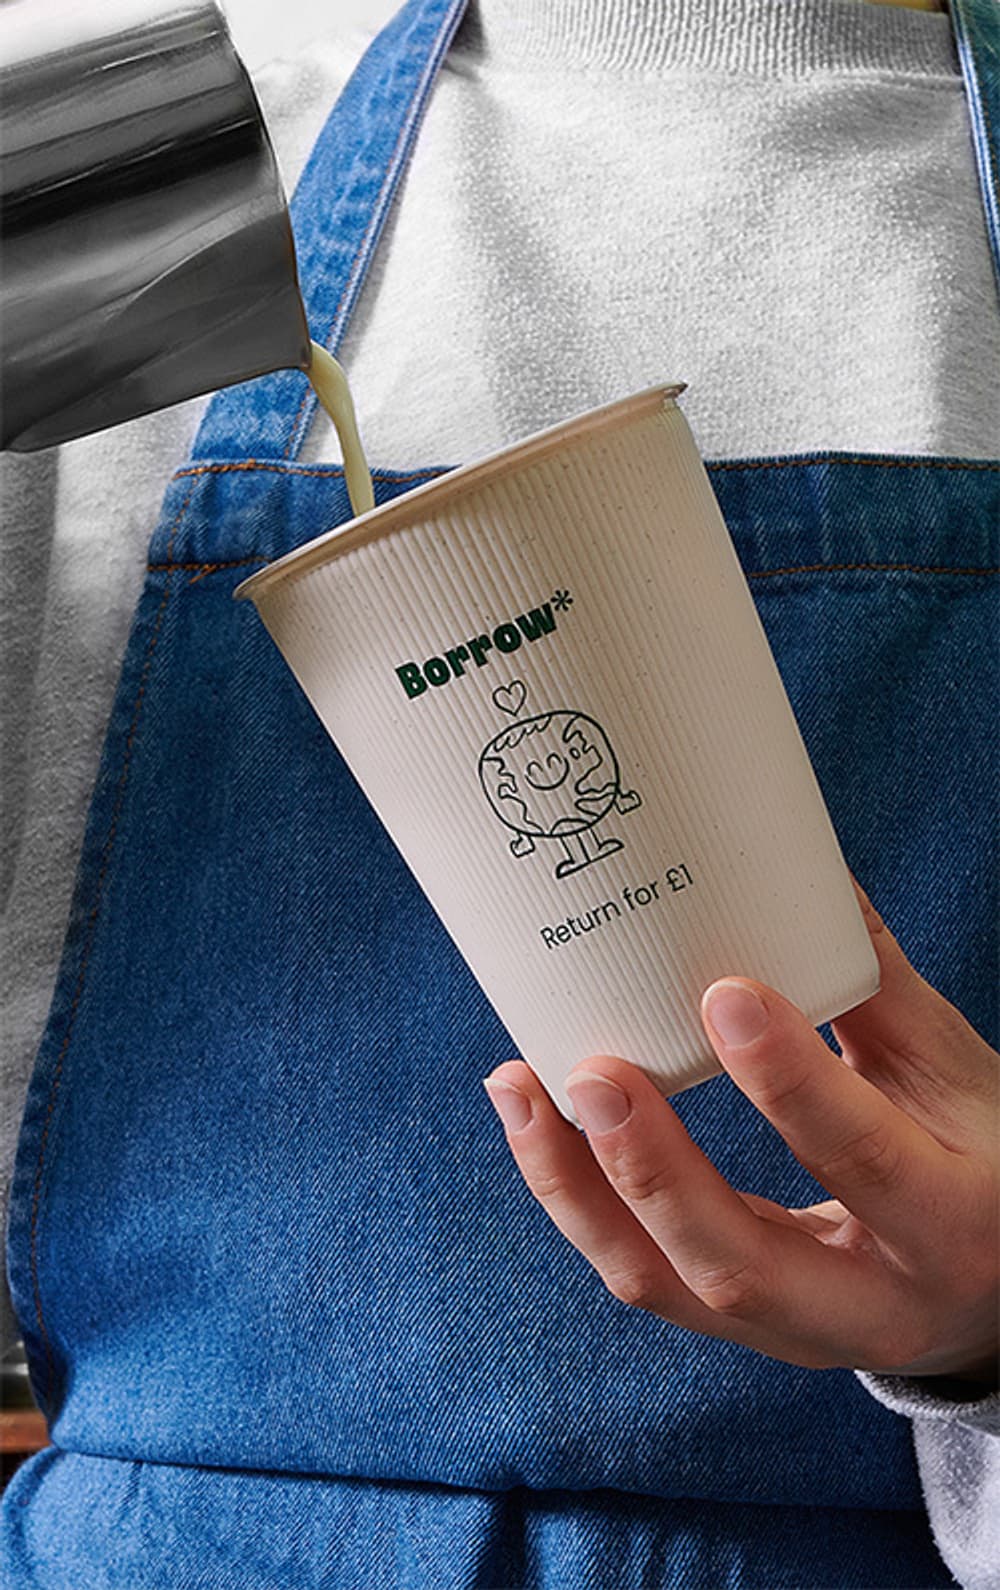 A coffee cup with "Borrow, return for £1" written on it, being filled with coffee.